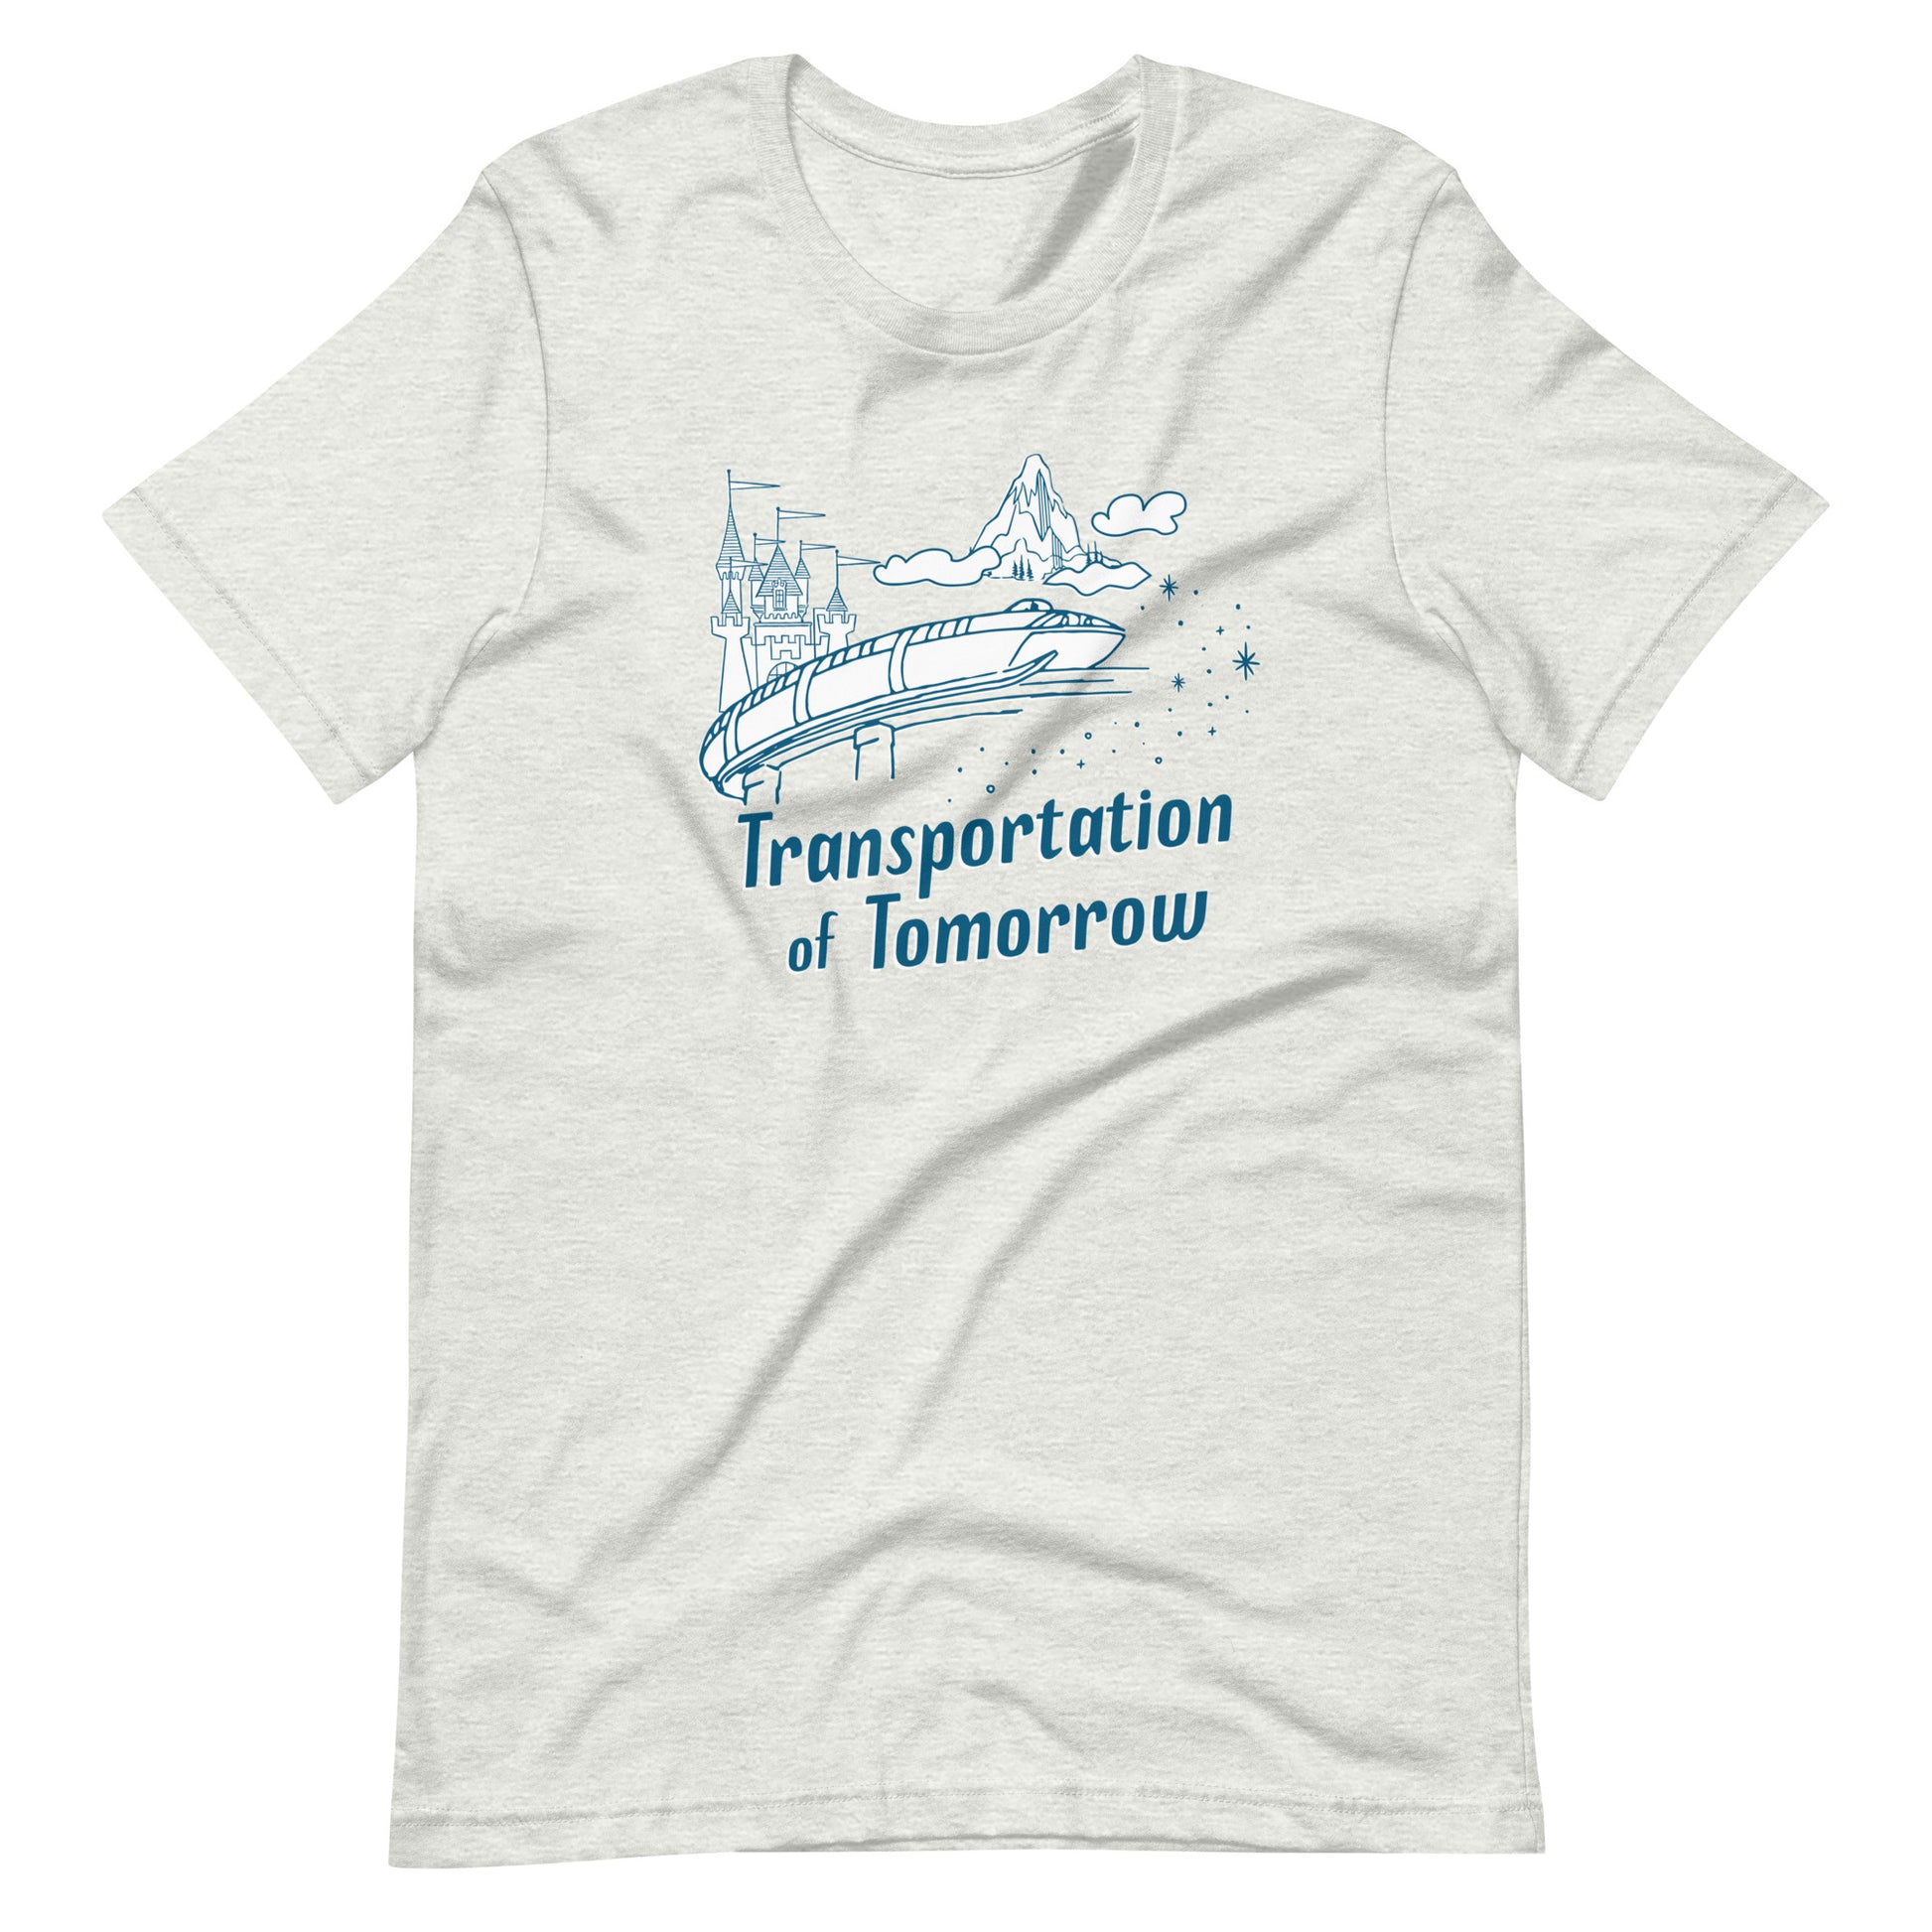 Heather ash colored shirt printed with vintage style sketch of the Matterhorn, Castle, and Monorail with pixie dust. The shirt says Transportation of Tomorrow.